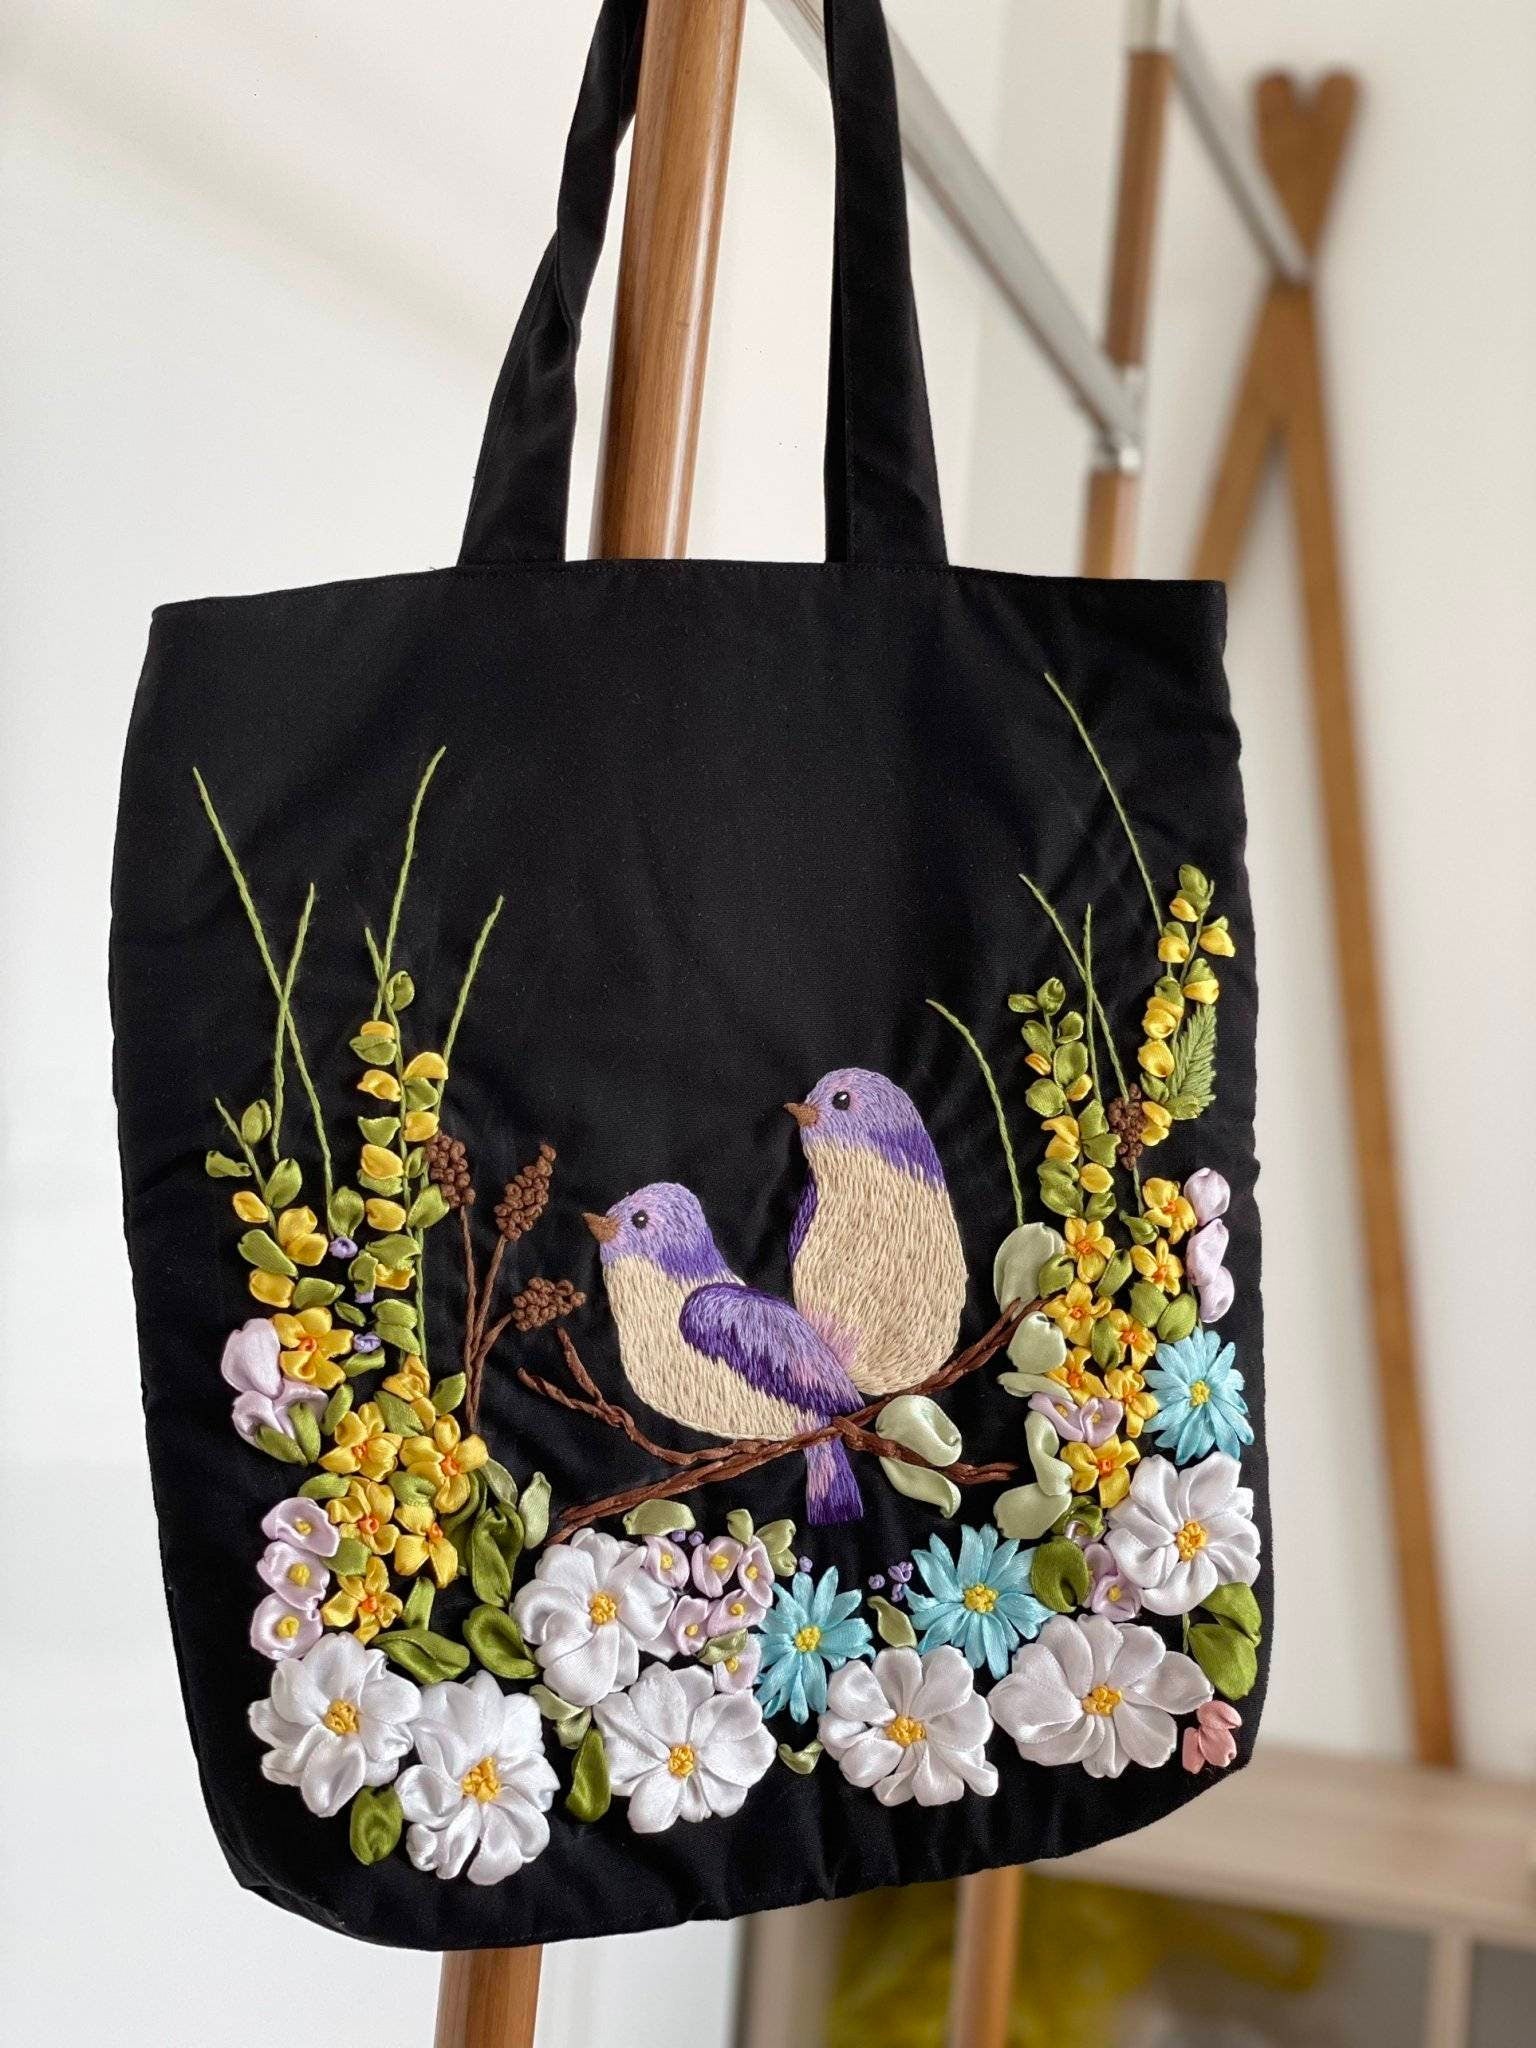 Fantastic Flock: The Bird Purse Collection | Wicker Darling